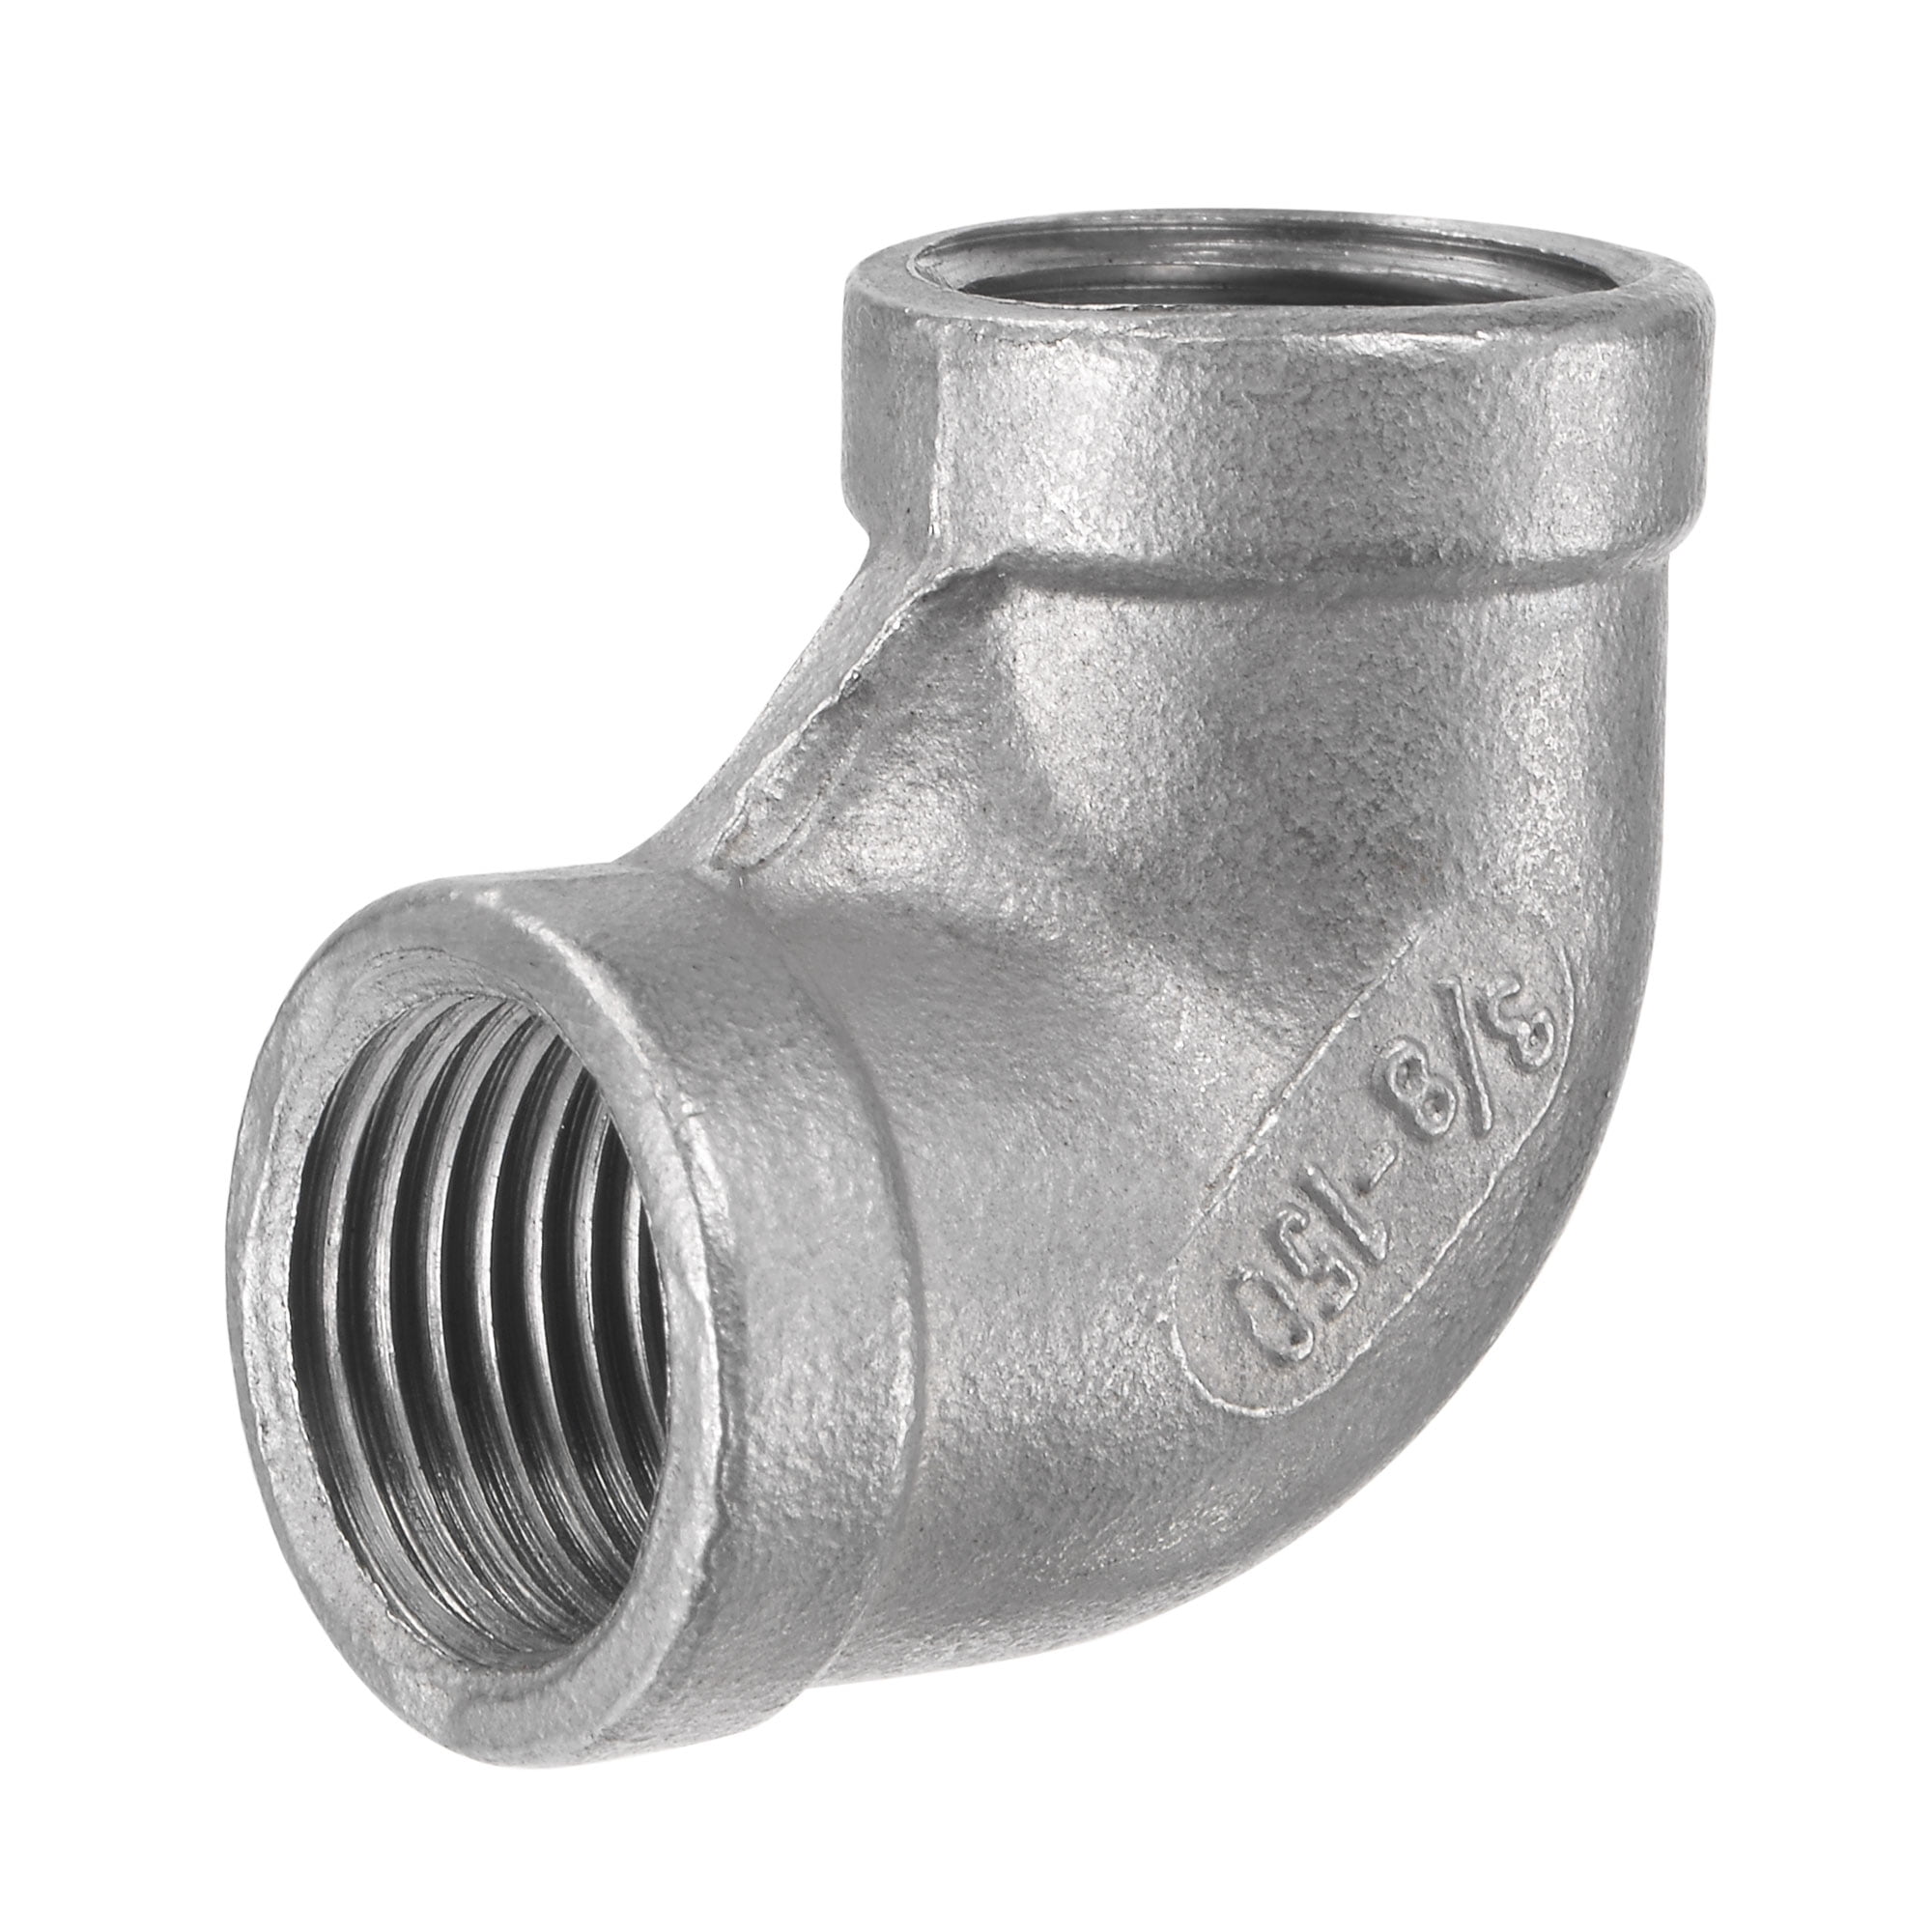 3/8"x1/4" Female Threaded Elbow Reducer Pipe Fitting 90 Degree angled SS304 NPT 